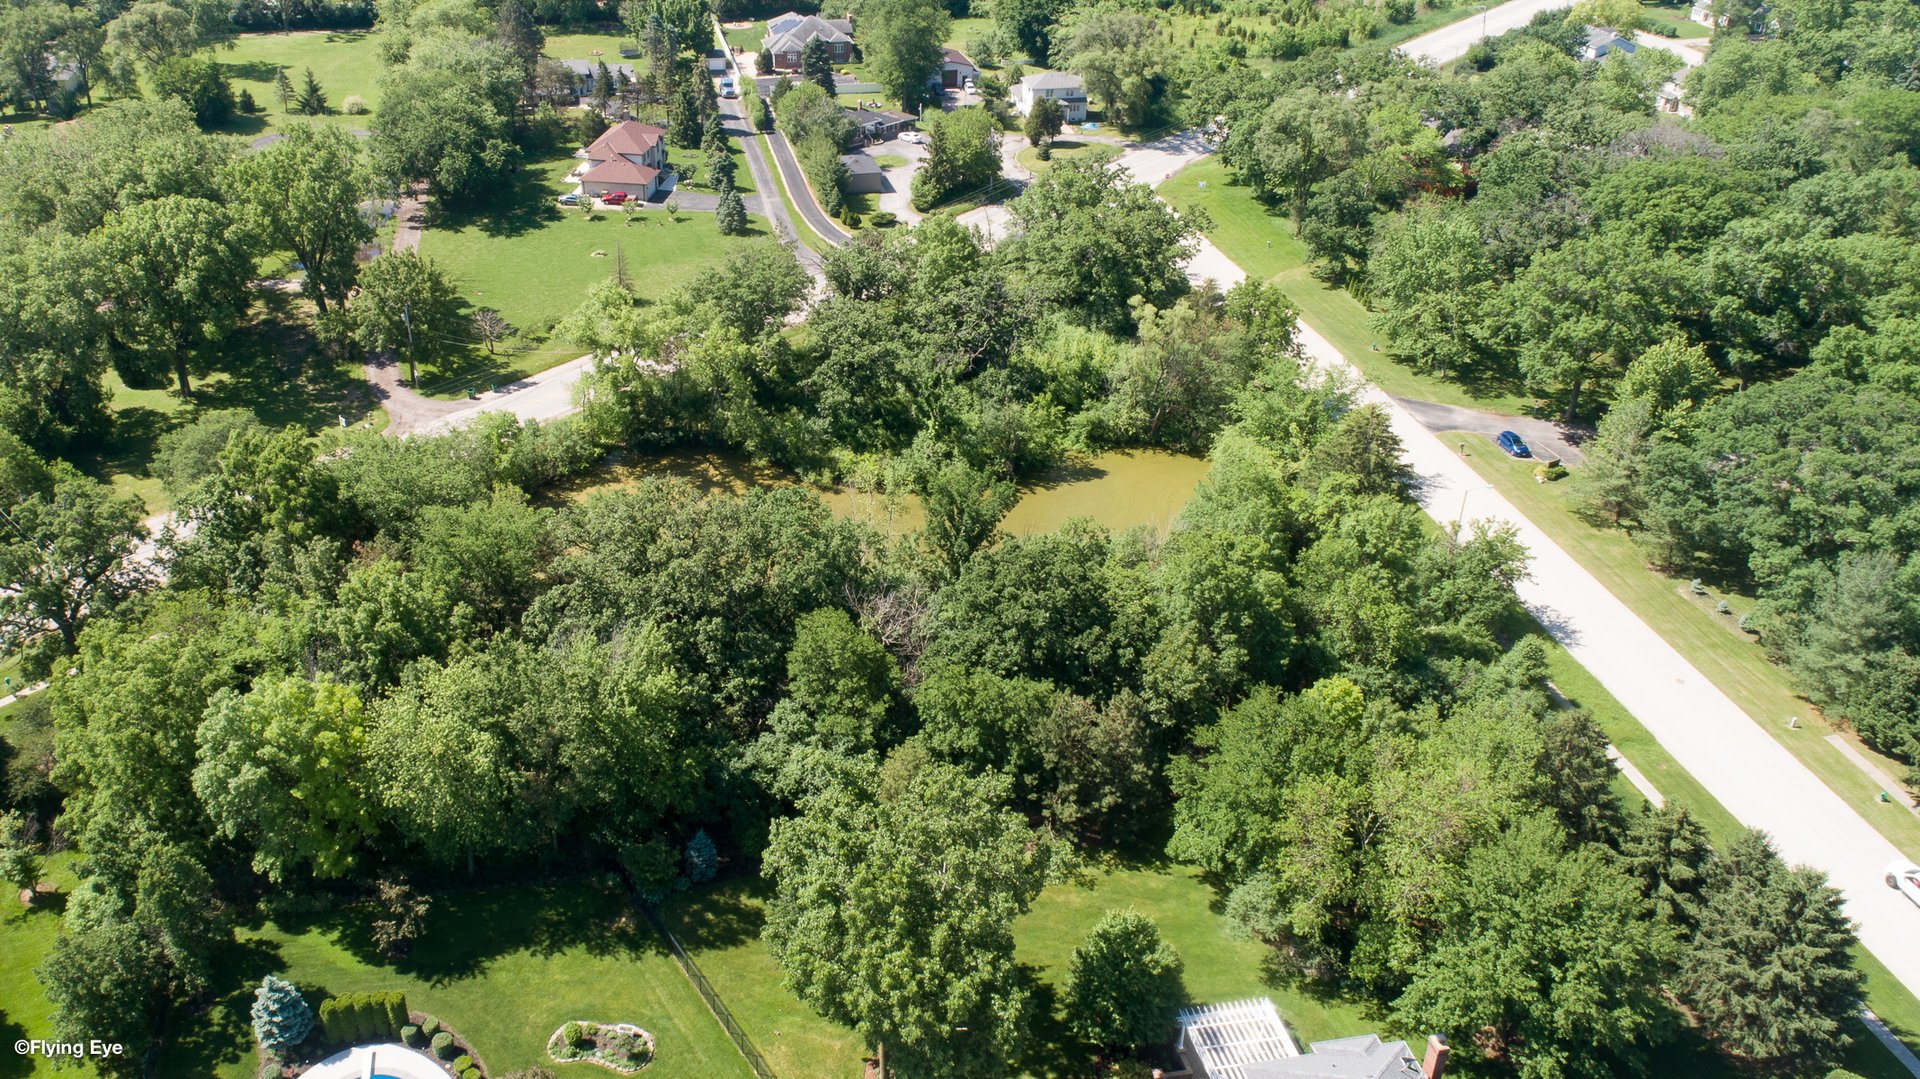 an aerial view of residential houses with outdoor space and trees